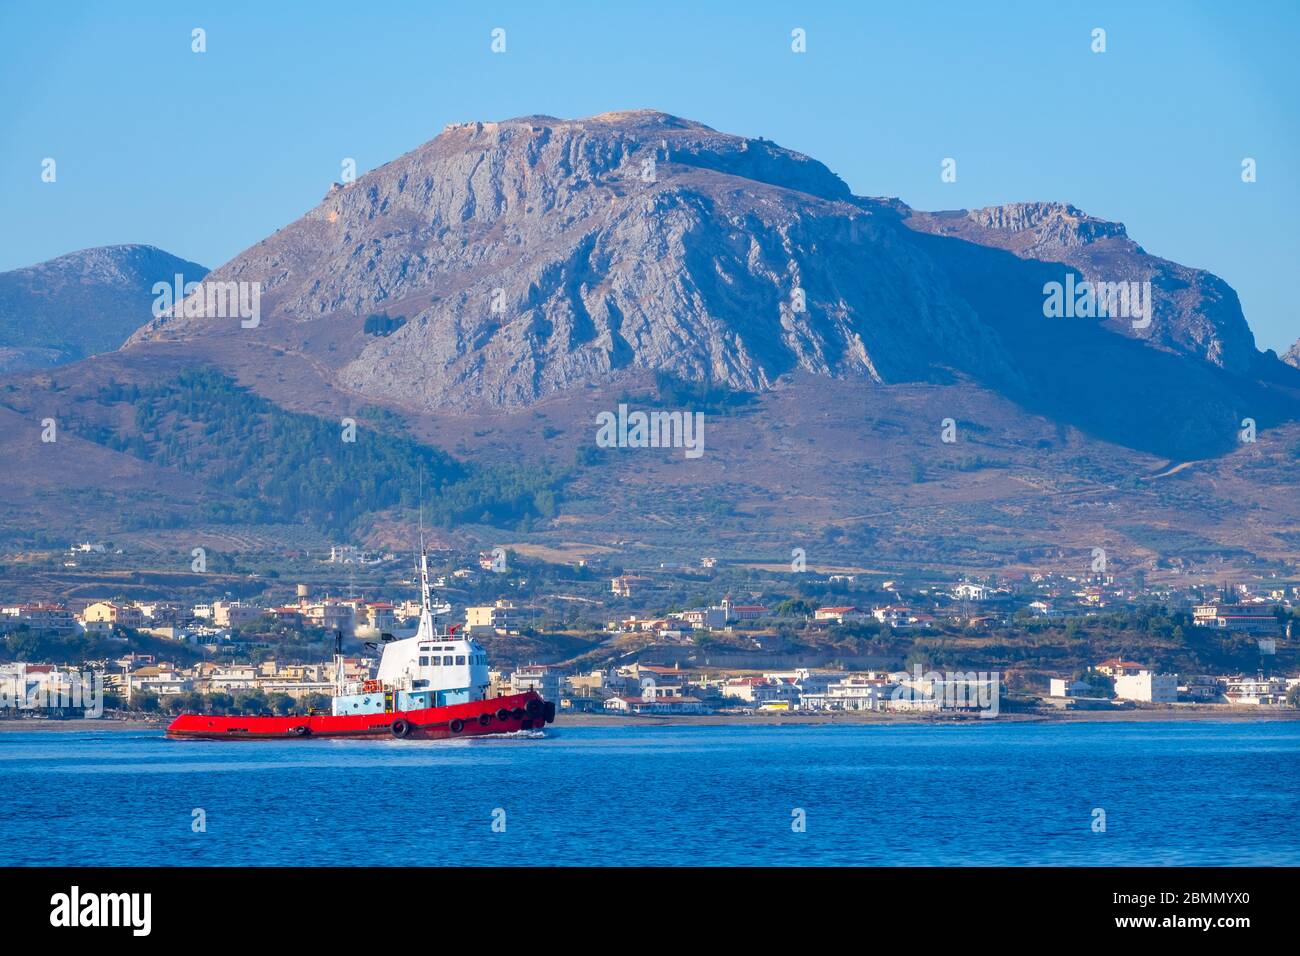 Sunny summer day in the gulf of Corinth. A tugboat in the background of a small town on a mountainous shore. View from the water Stock Photo